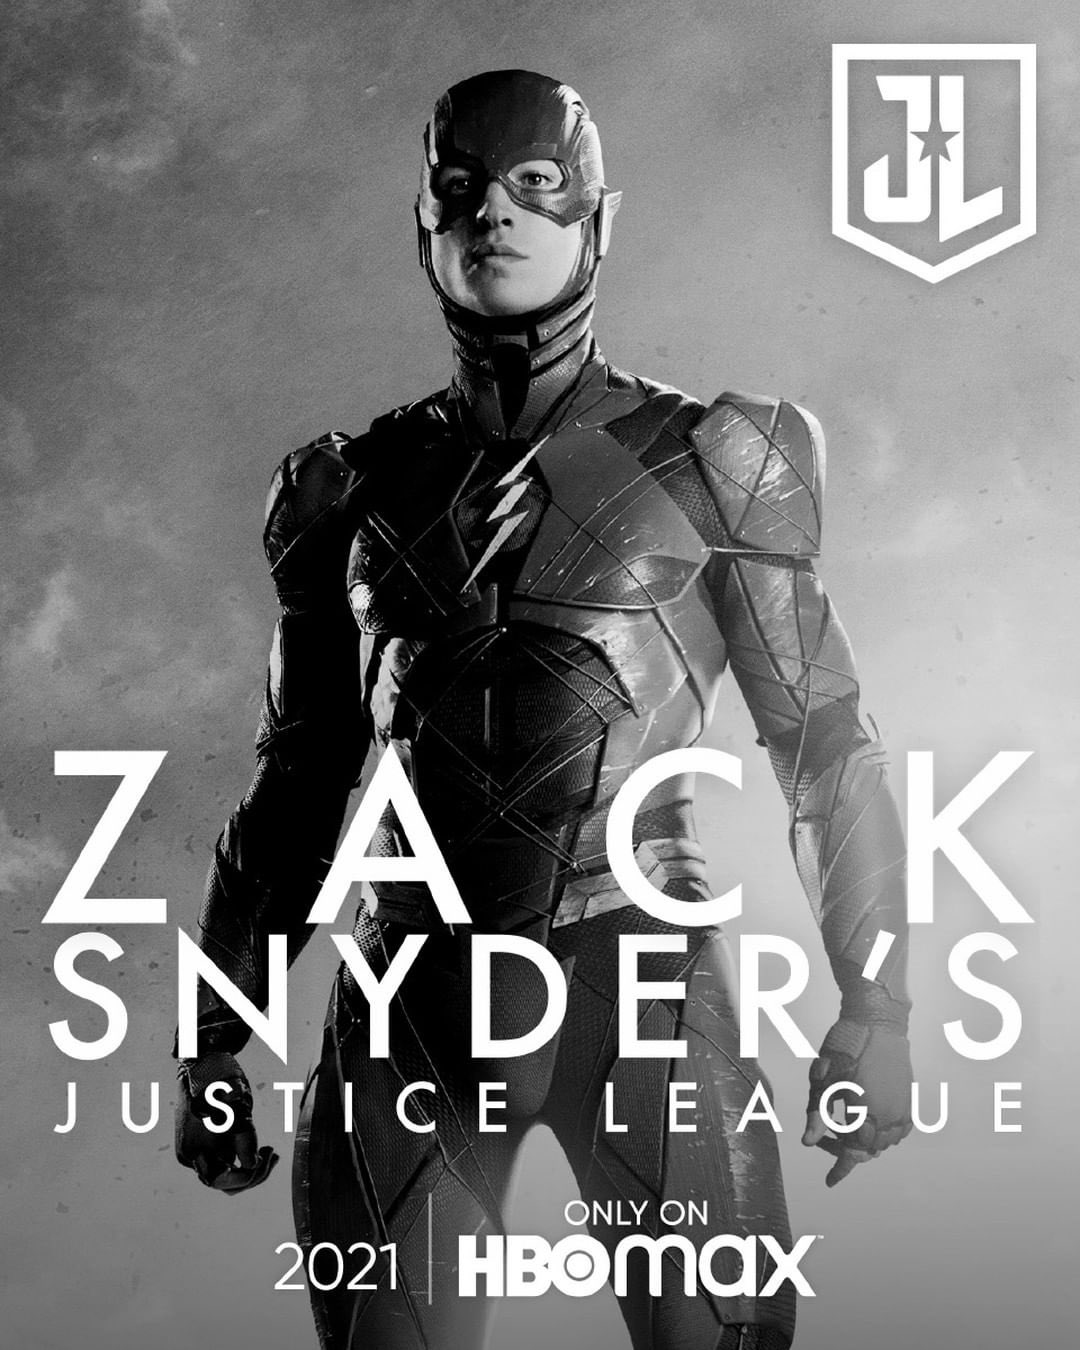  Zack Snyder's Justice League Poster - Ezra Miller as The Flash